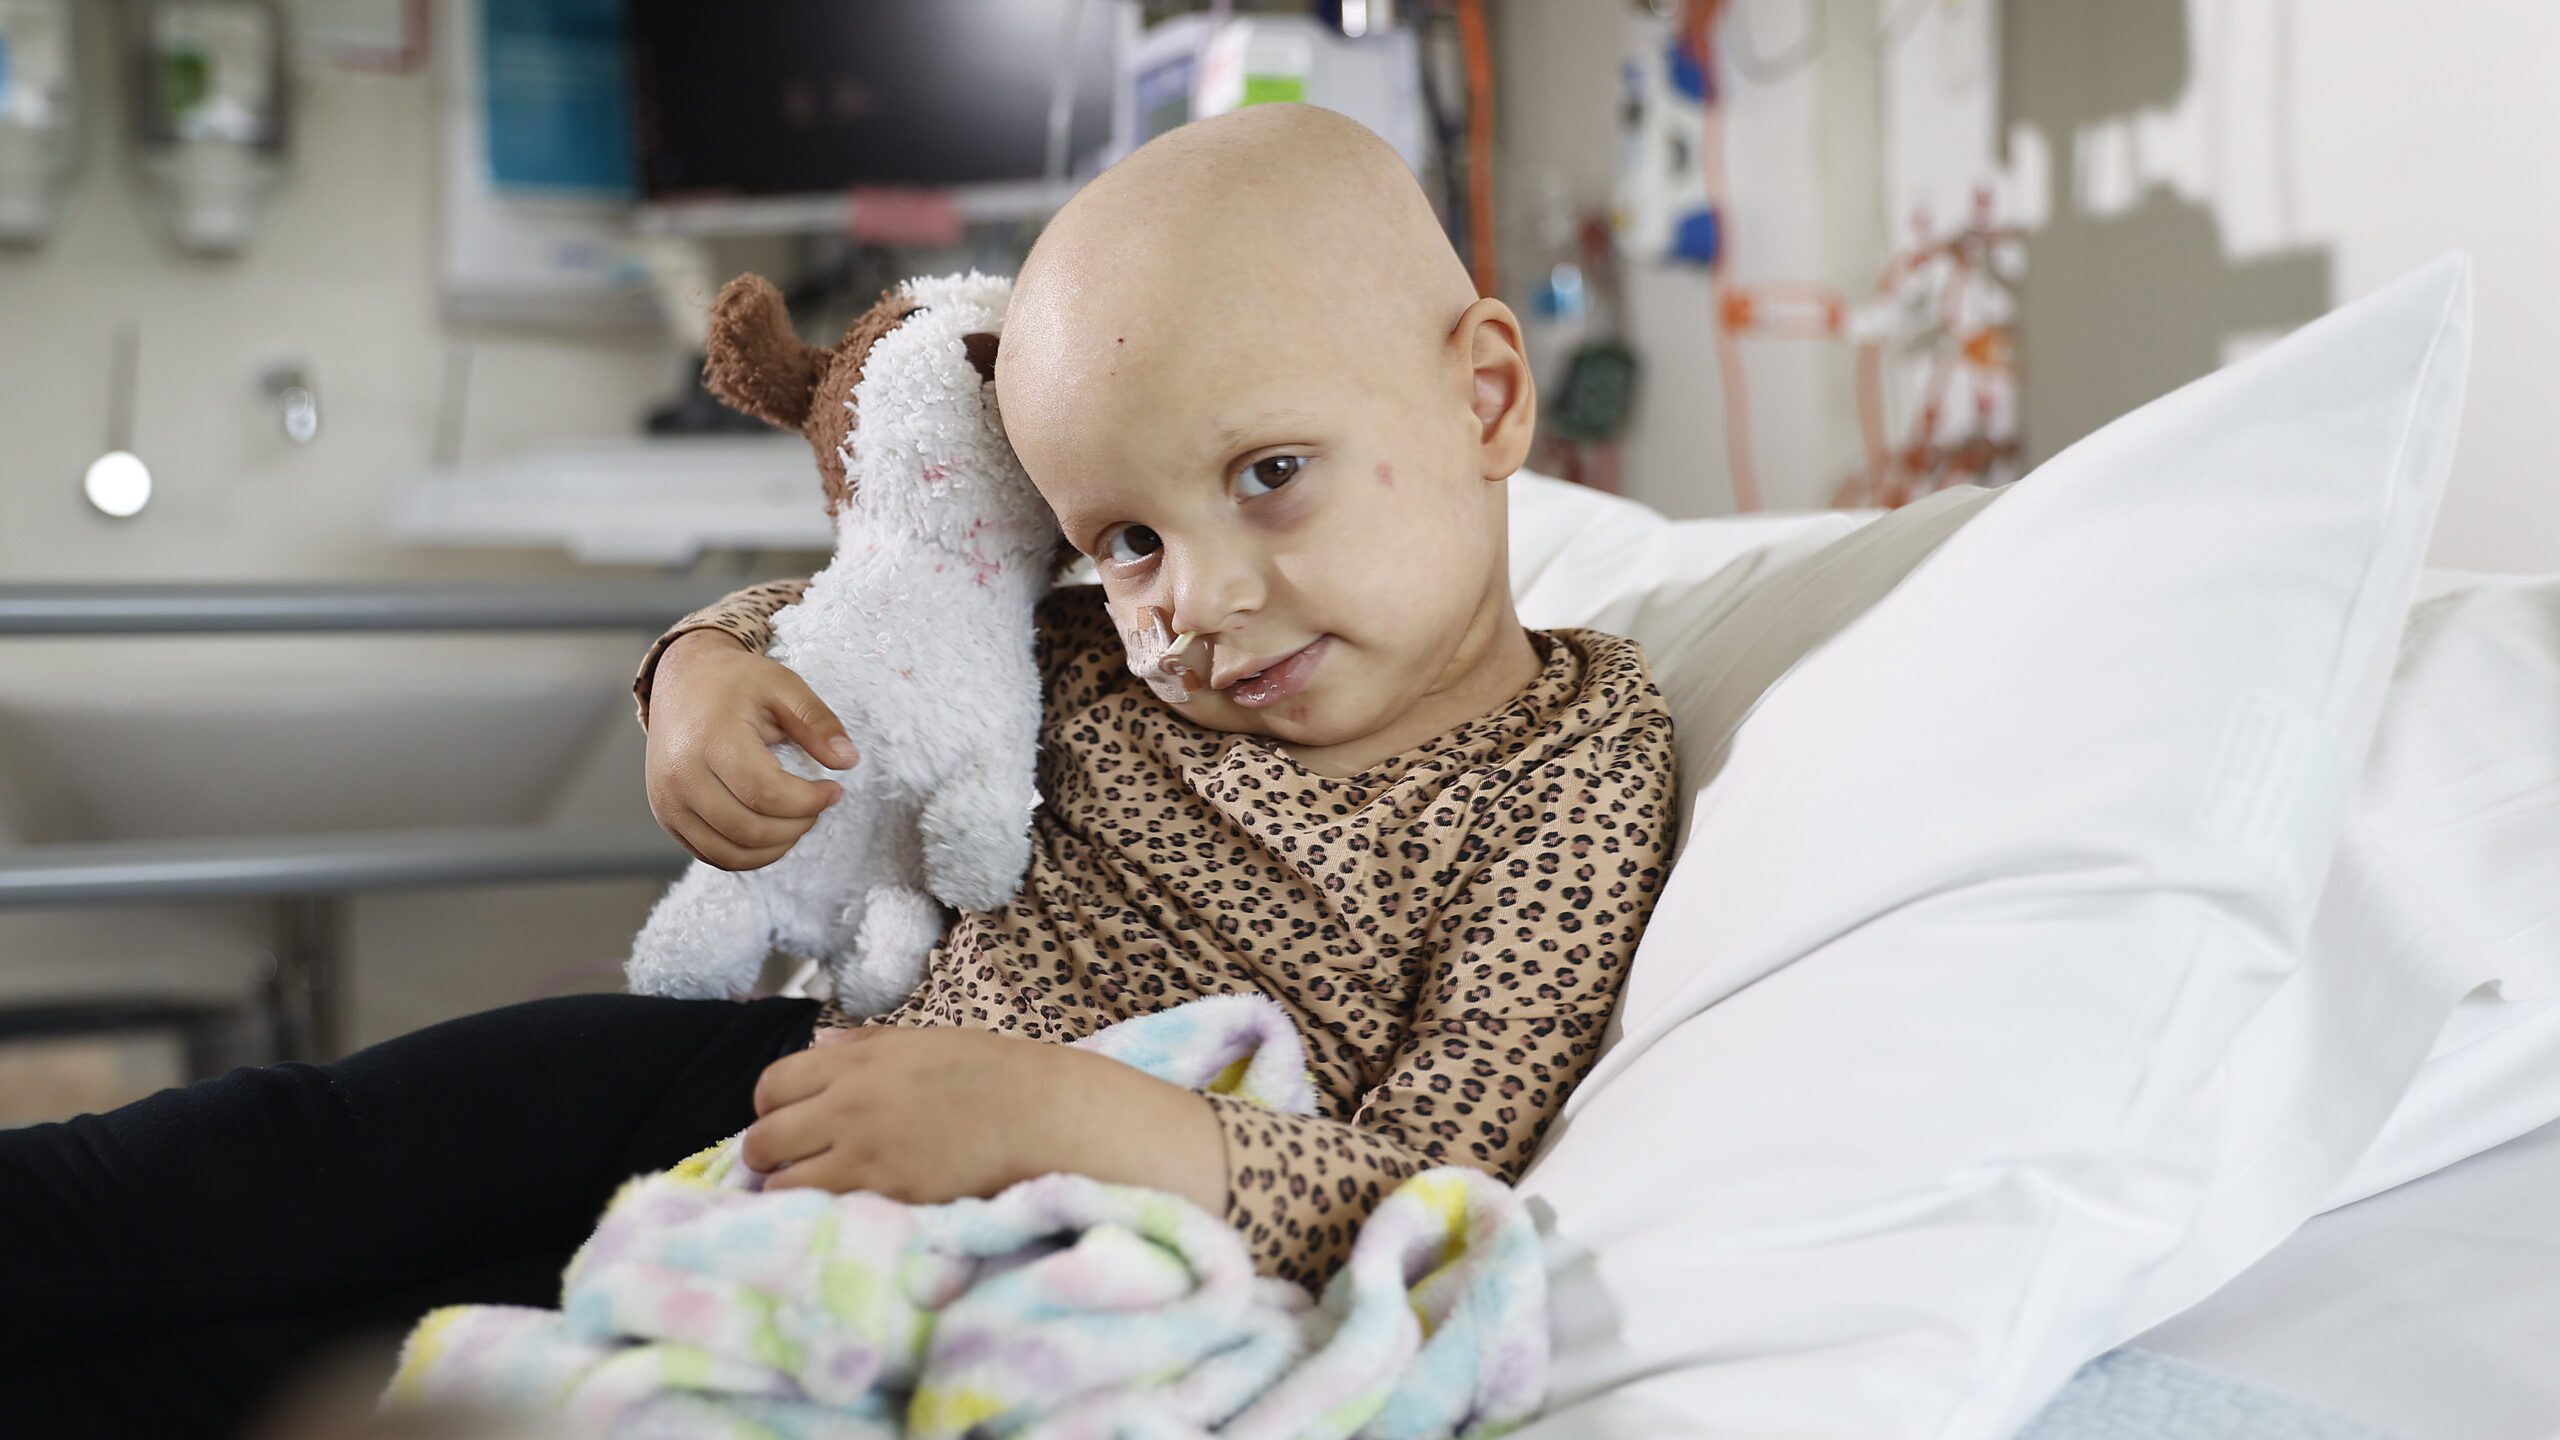 Ayla sitting on her hospital bed holding her stuffed dog toy. Ayla is bald and has a nasal gastic tube.